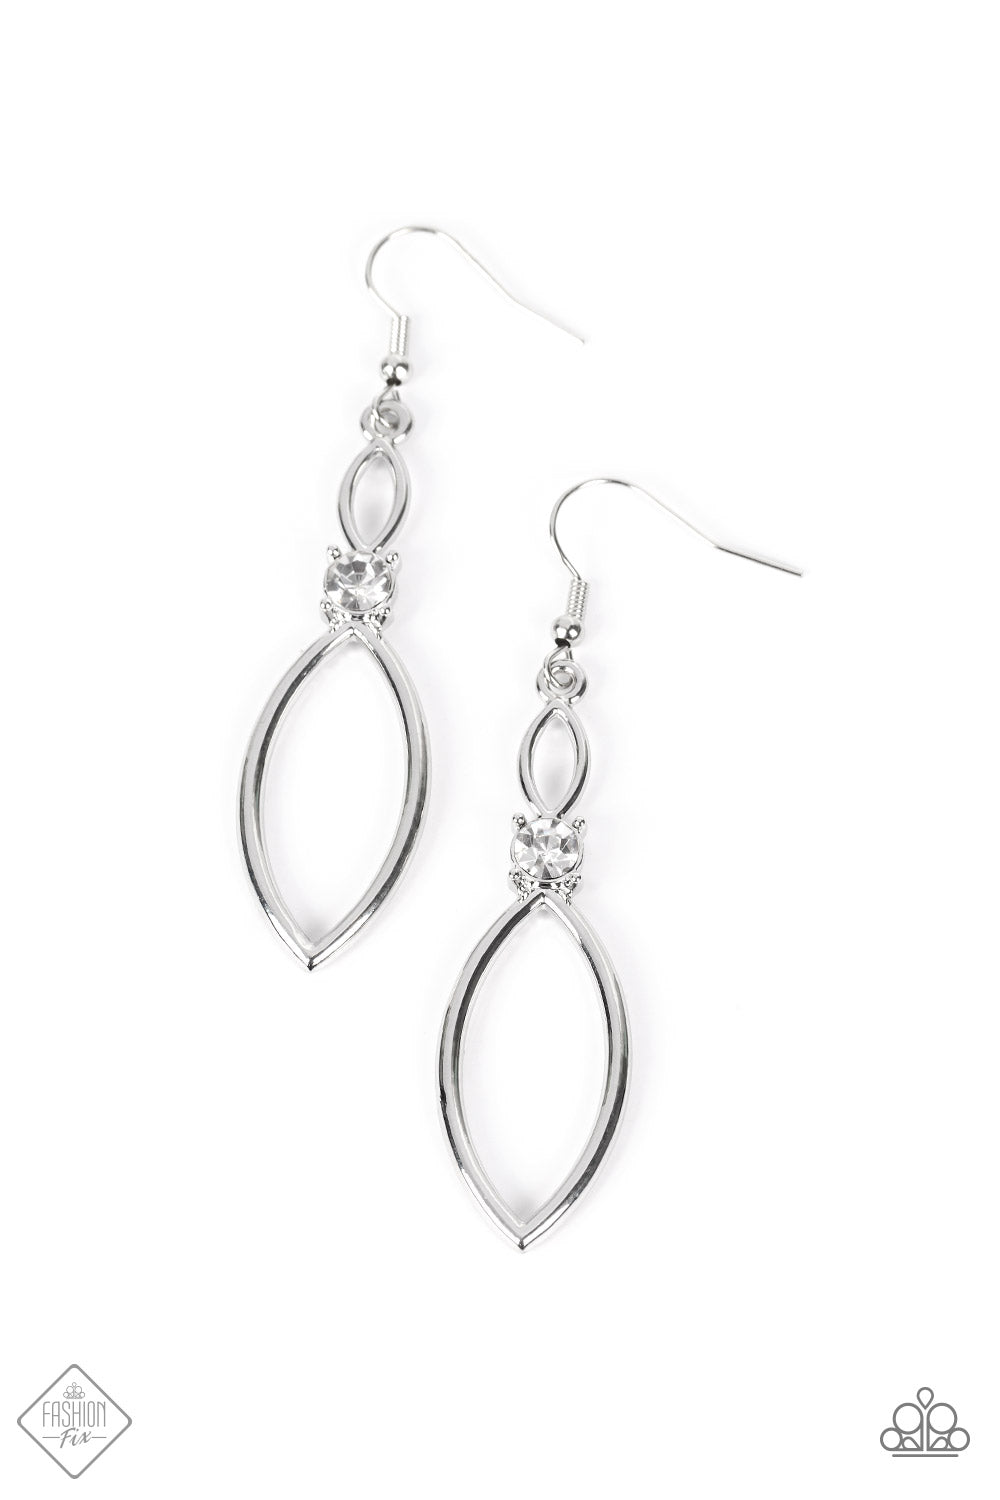 Plucked Petals - White and Silver Earrings - Paparazzi Accessories Bejeweled Accessories By Kristie